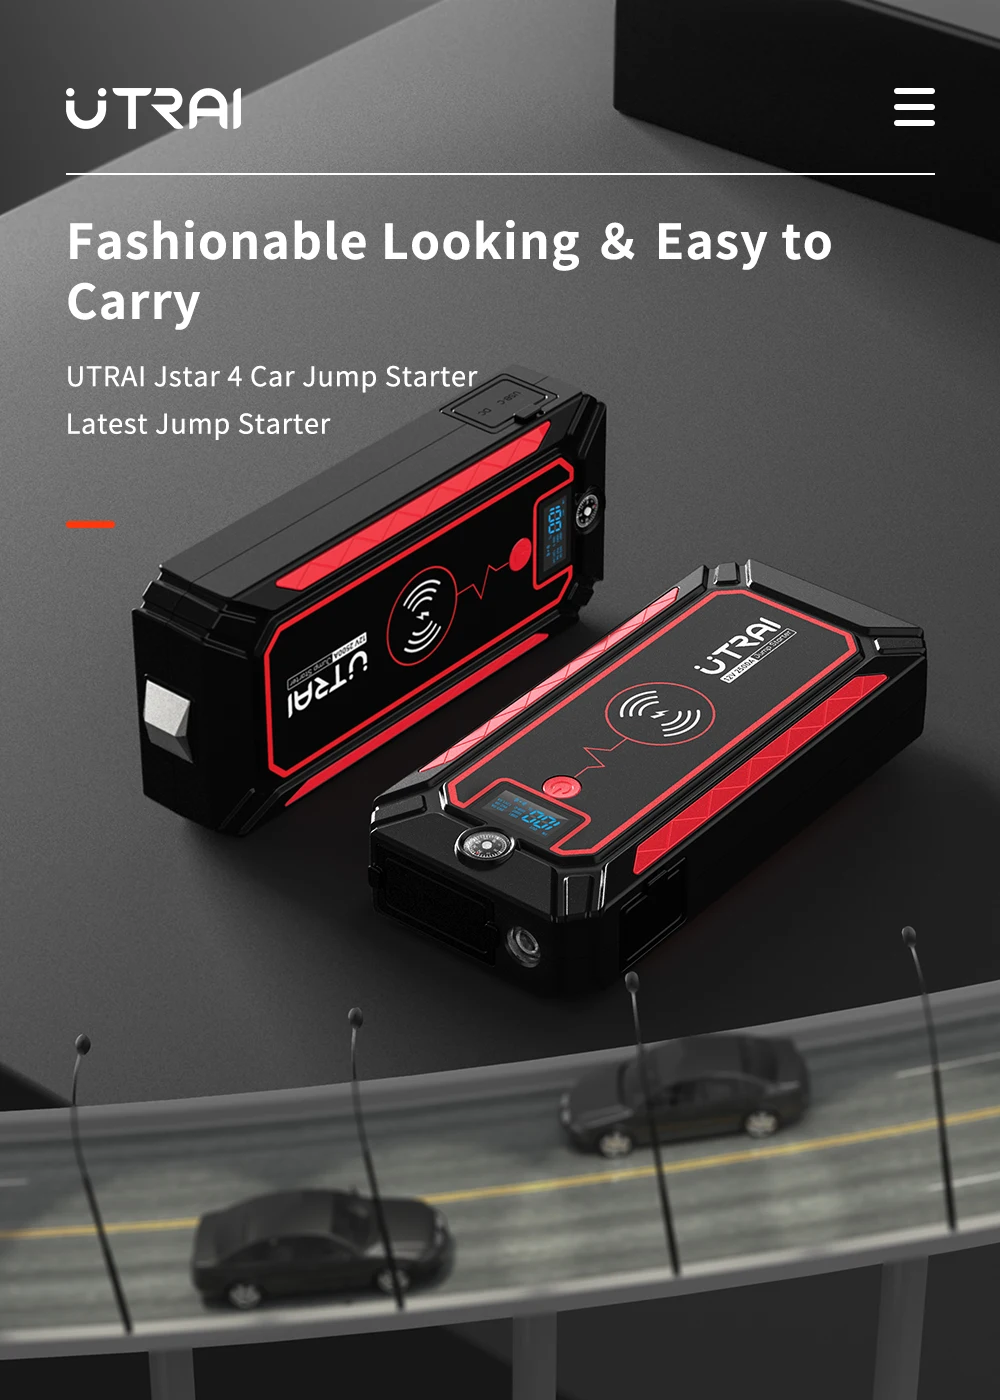 car jump starter UTRAI Car Jump Starter 24000mAh 2500A Power Bank 12V Car Battery with 10W Wireless Charger LCD Screen Starting Device noco gb150